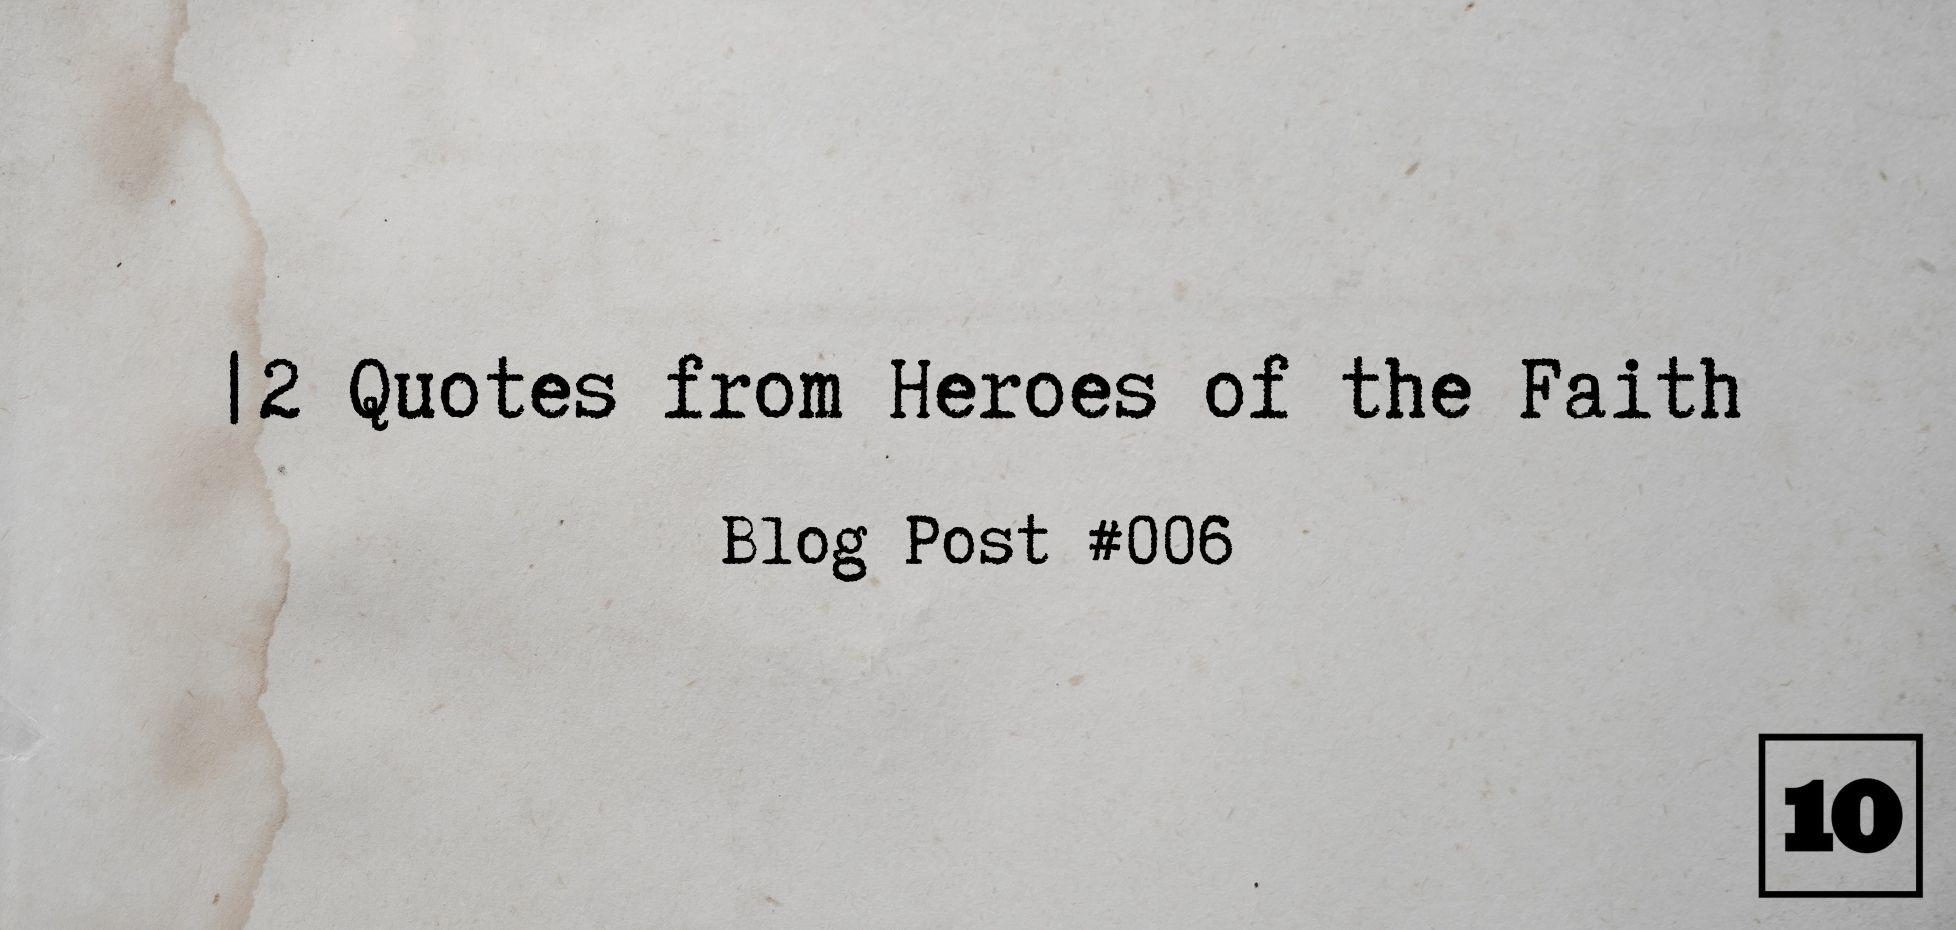 12 Quotes from Heroes of the Faith